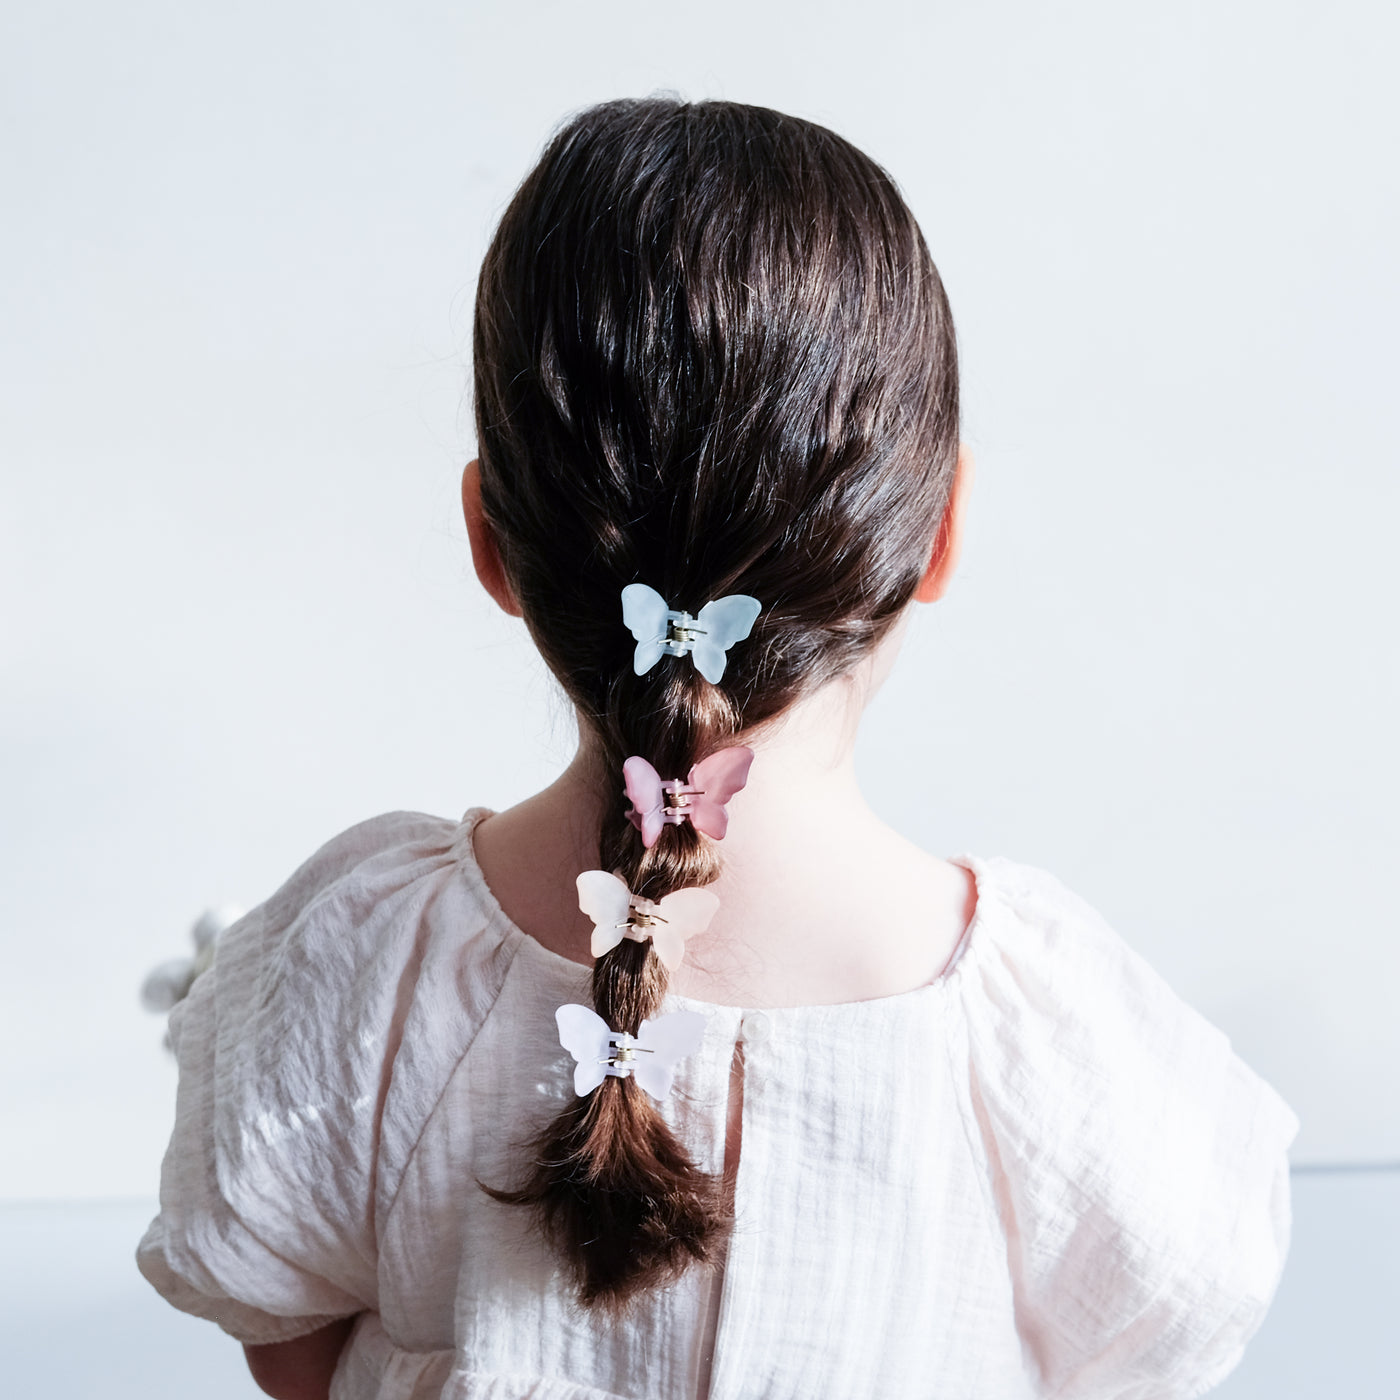 Dark haired little girl with hair worn in a pony tail secured by pretty butterfly shape bulldog clips